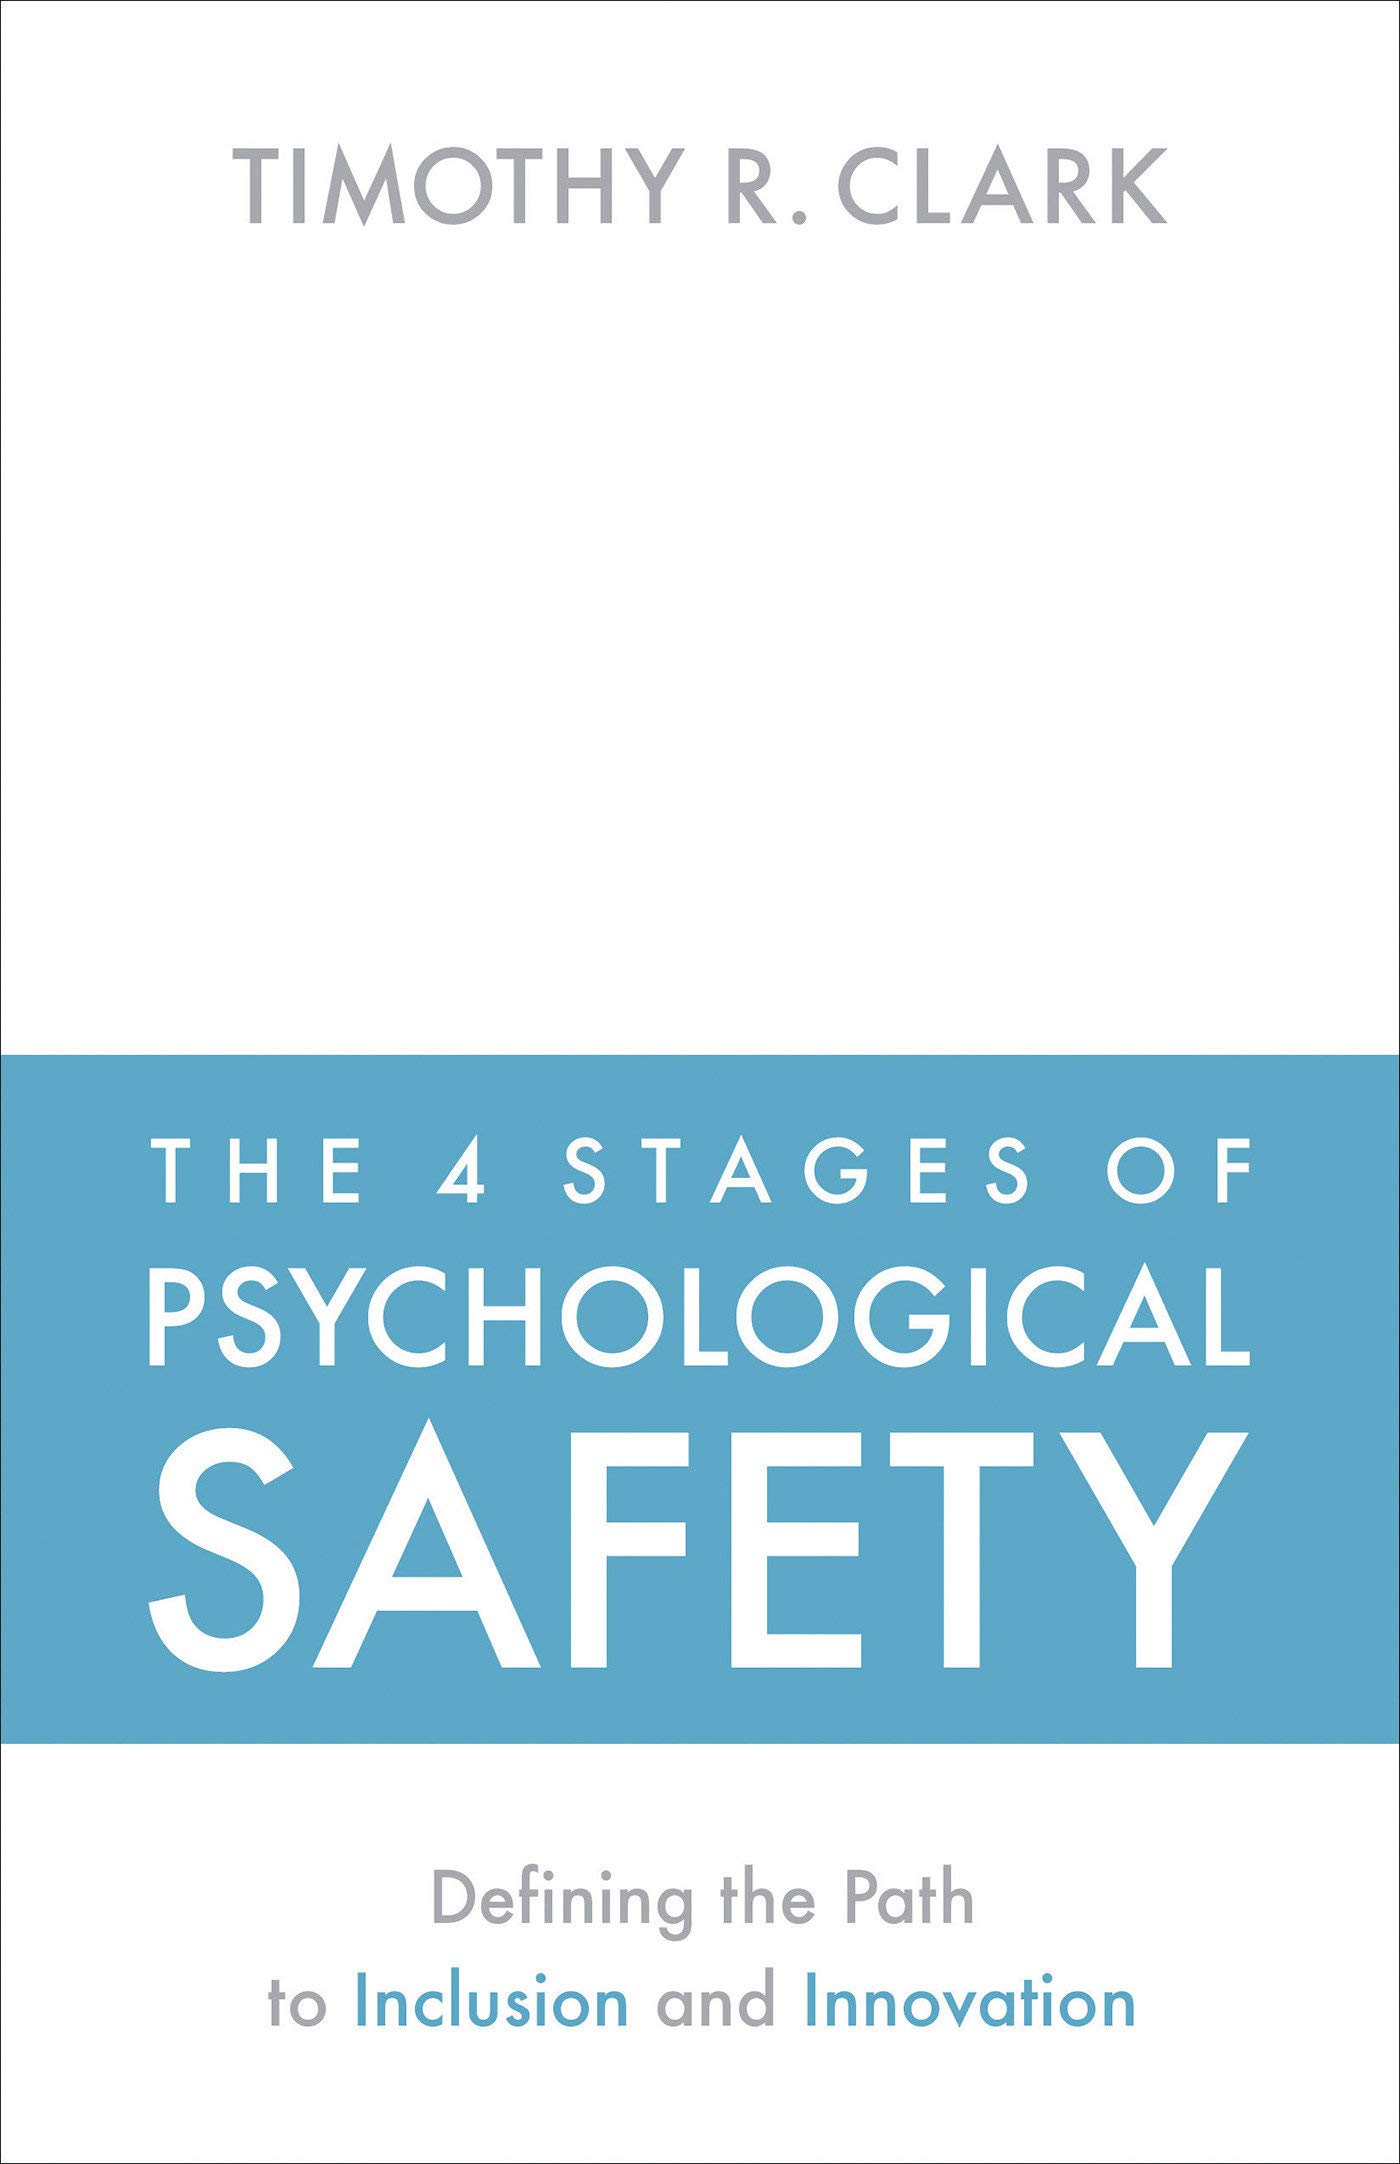 4 Stages of Psychological Safety (2020, Berrett-Koehler Publishers, Incorporated)